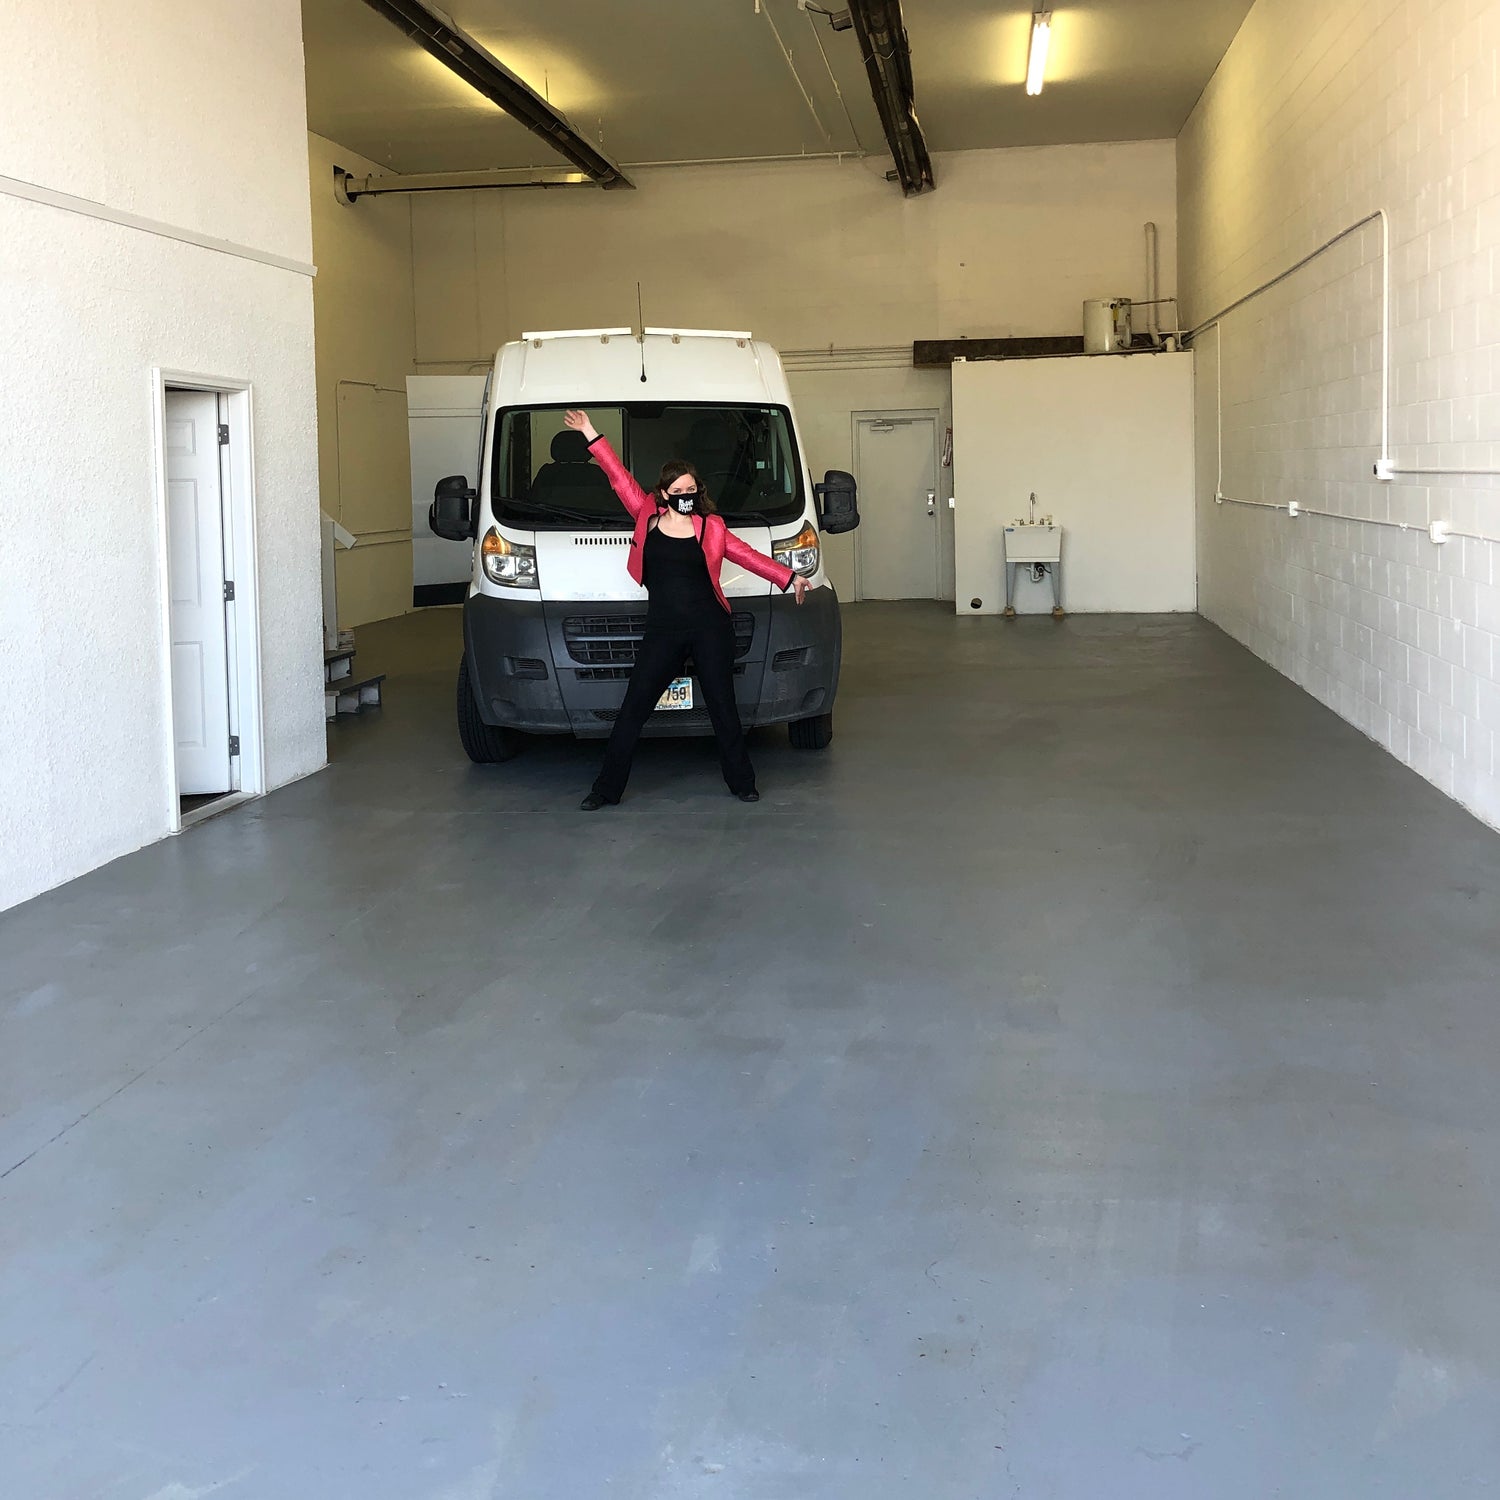 A young woman in an all black outfit and a pink blazer standing in front of a white cargo van in a warehouse with her arms up.